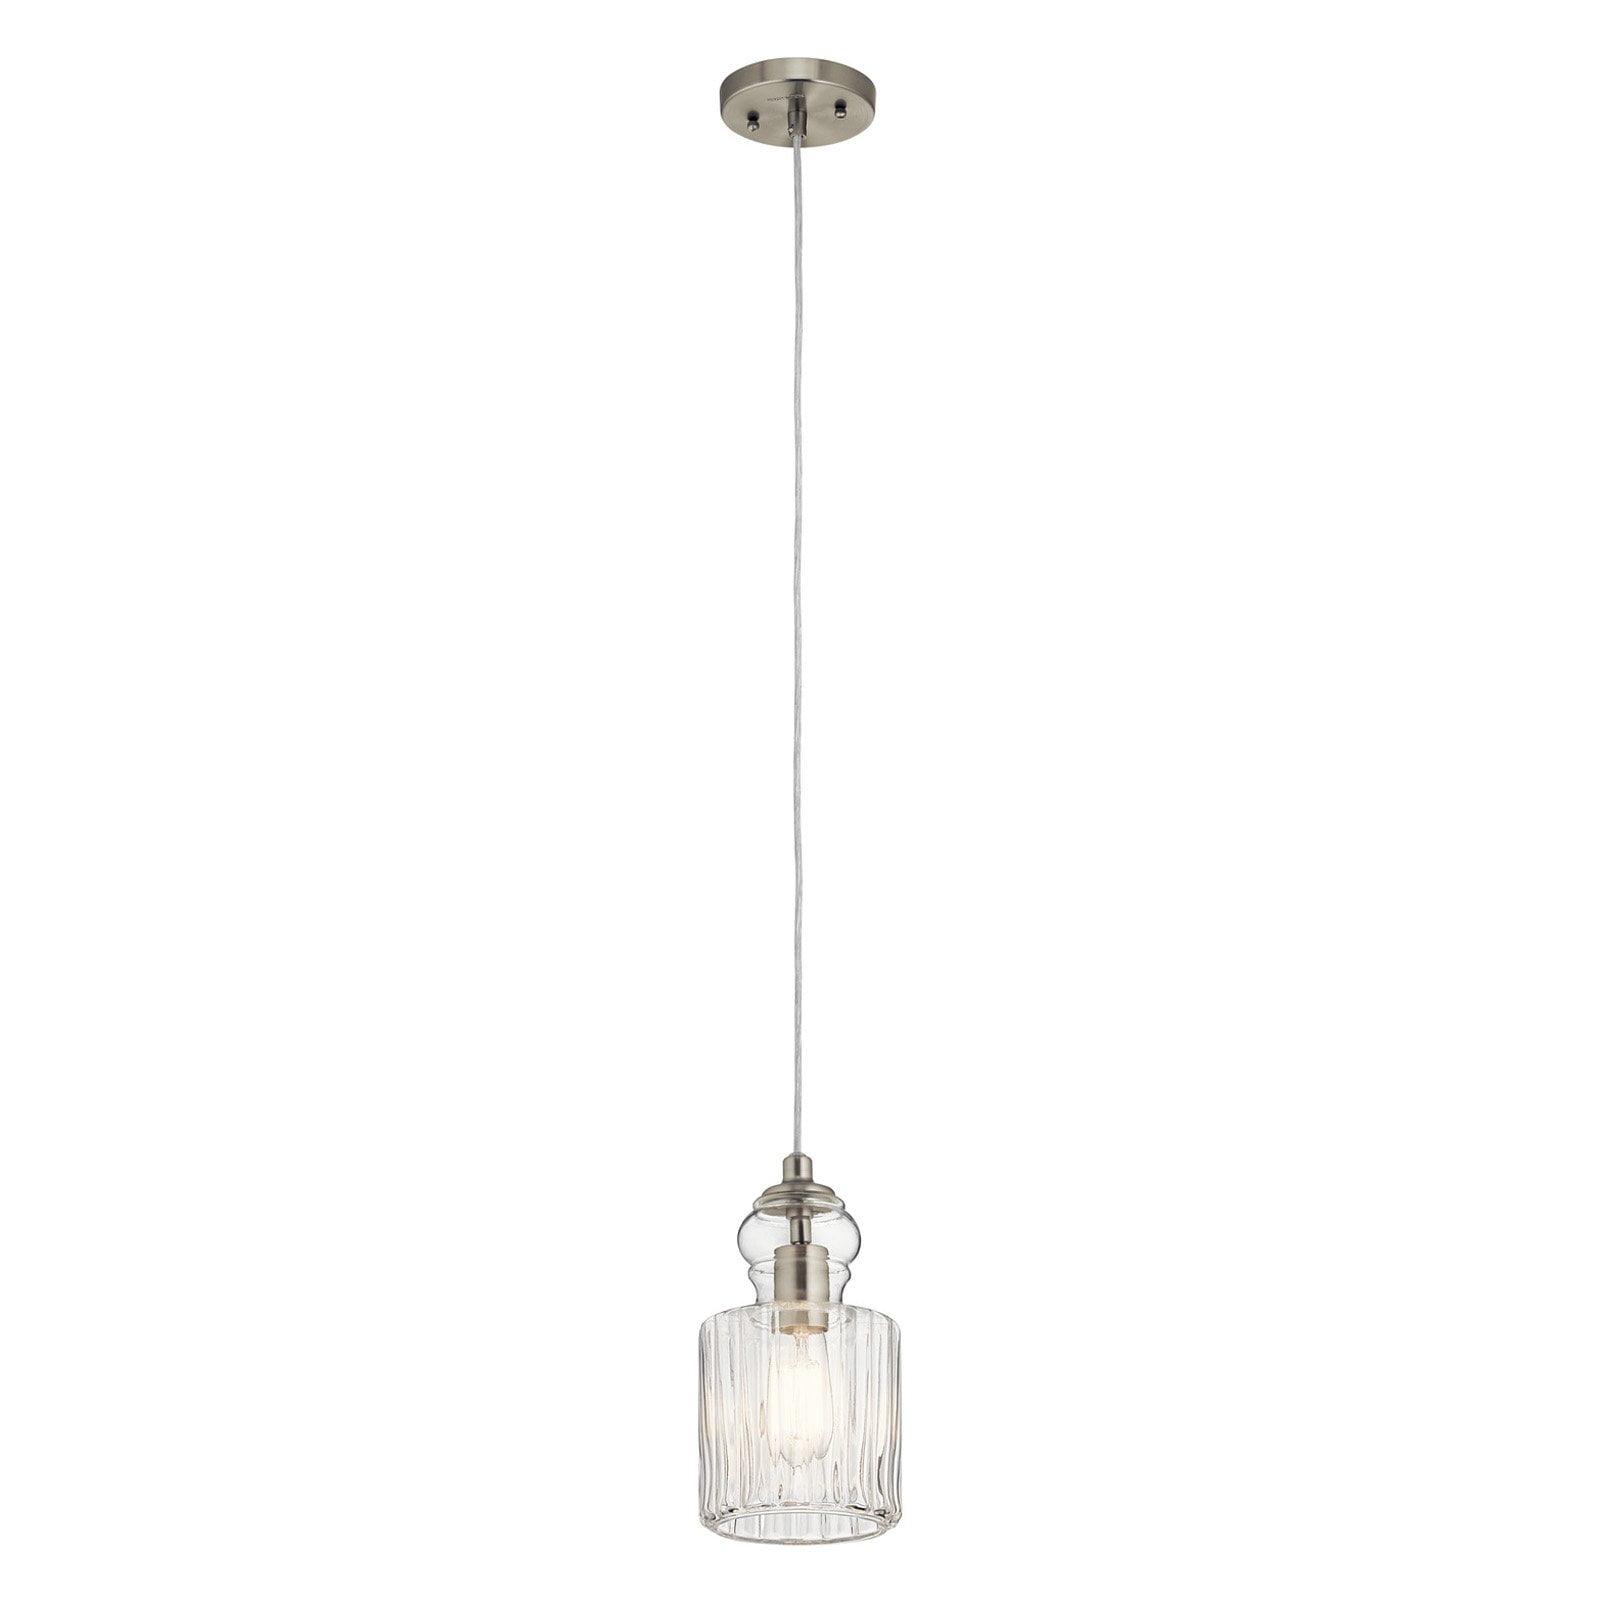 Riviera 5.75" Mini Pendant Light in Brushed Nickel with Clear Glass